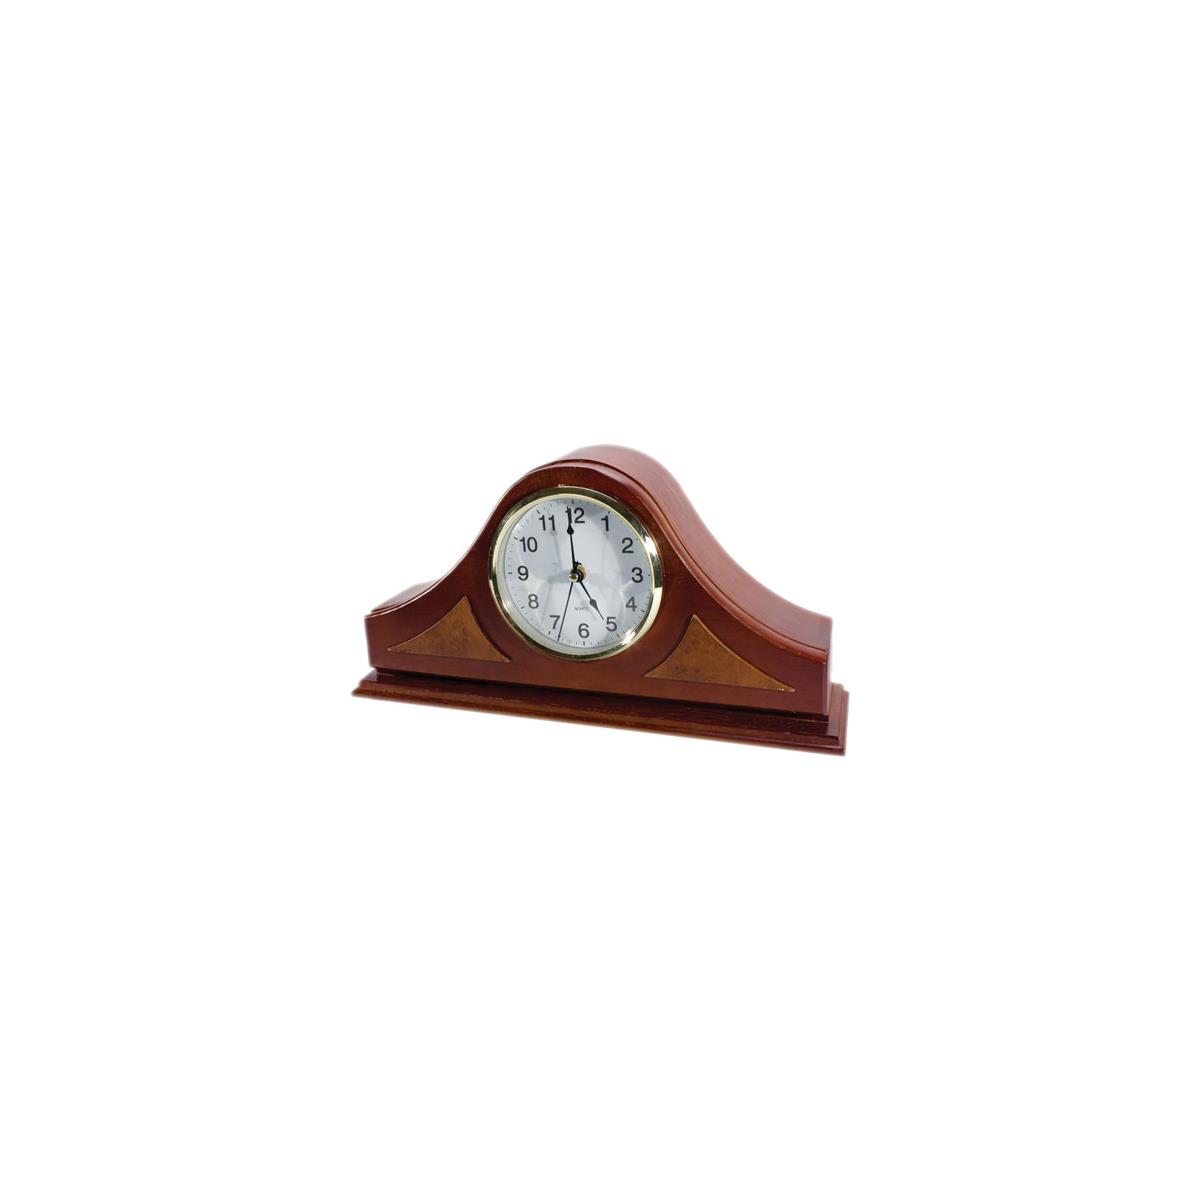 Image of KJB Security Products C1300MC Hardwired Mantel Clock Color Covert Camera